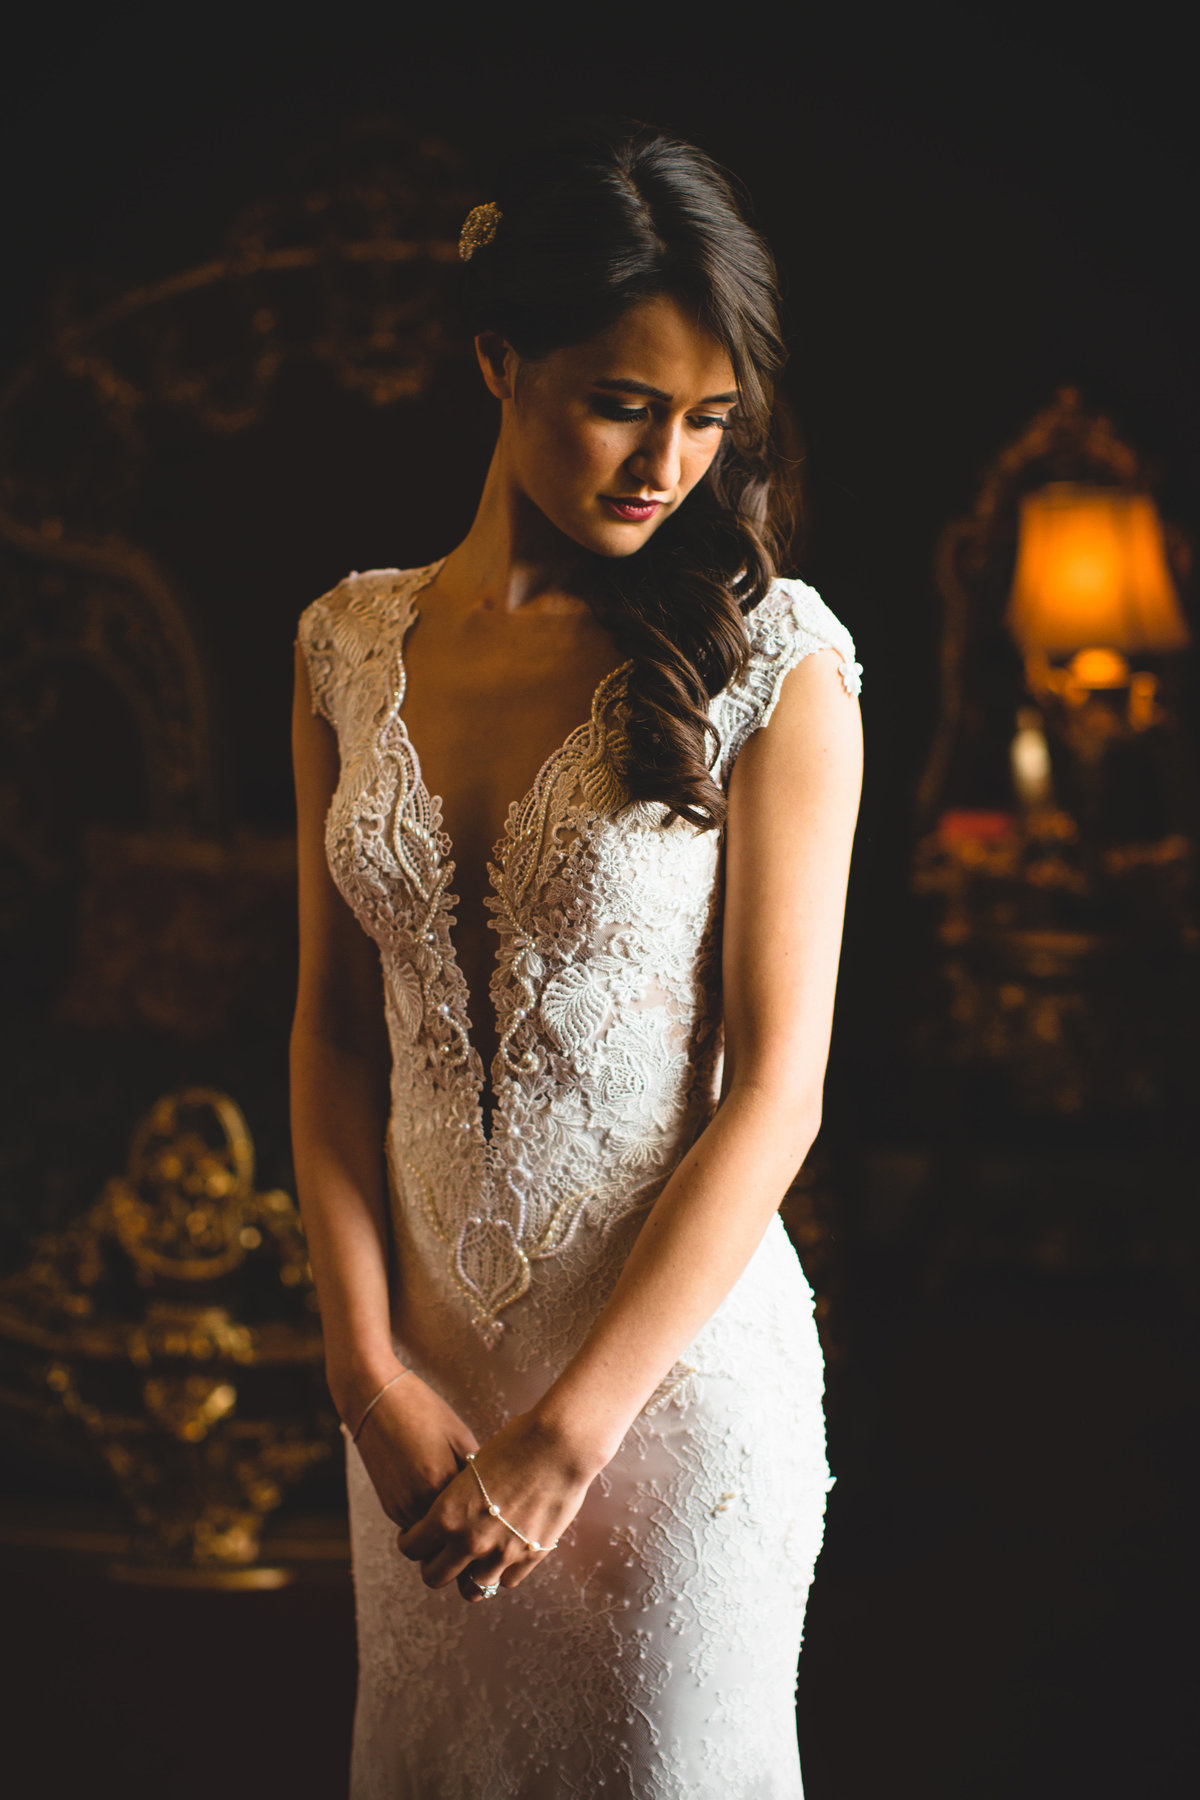 A beautiful bride stood by a window at Knowsley hall in light